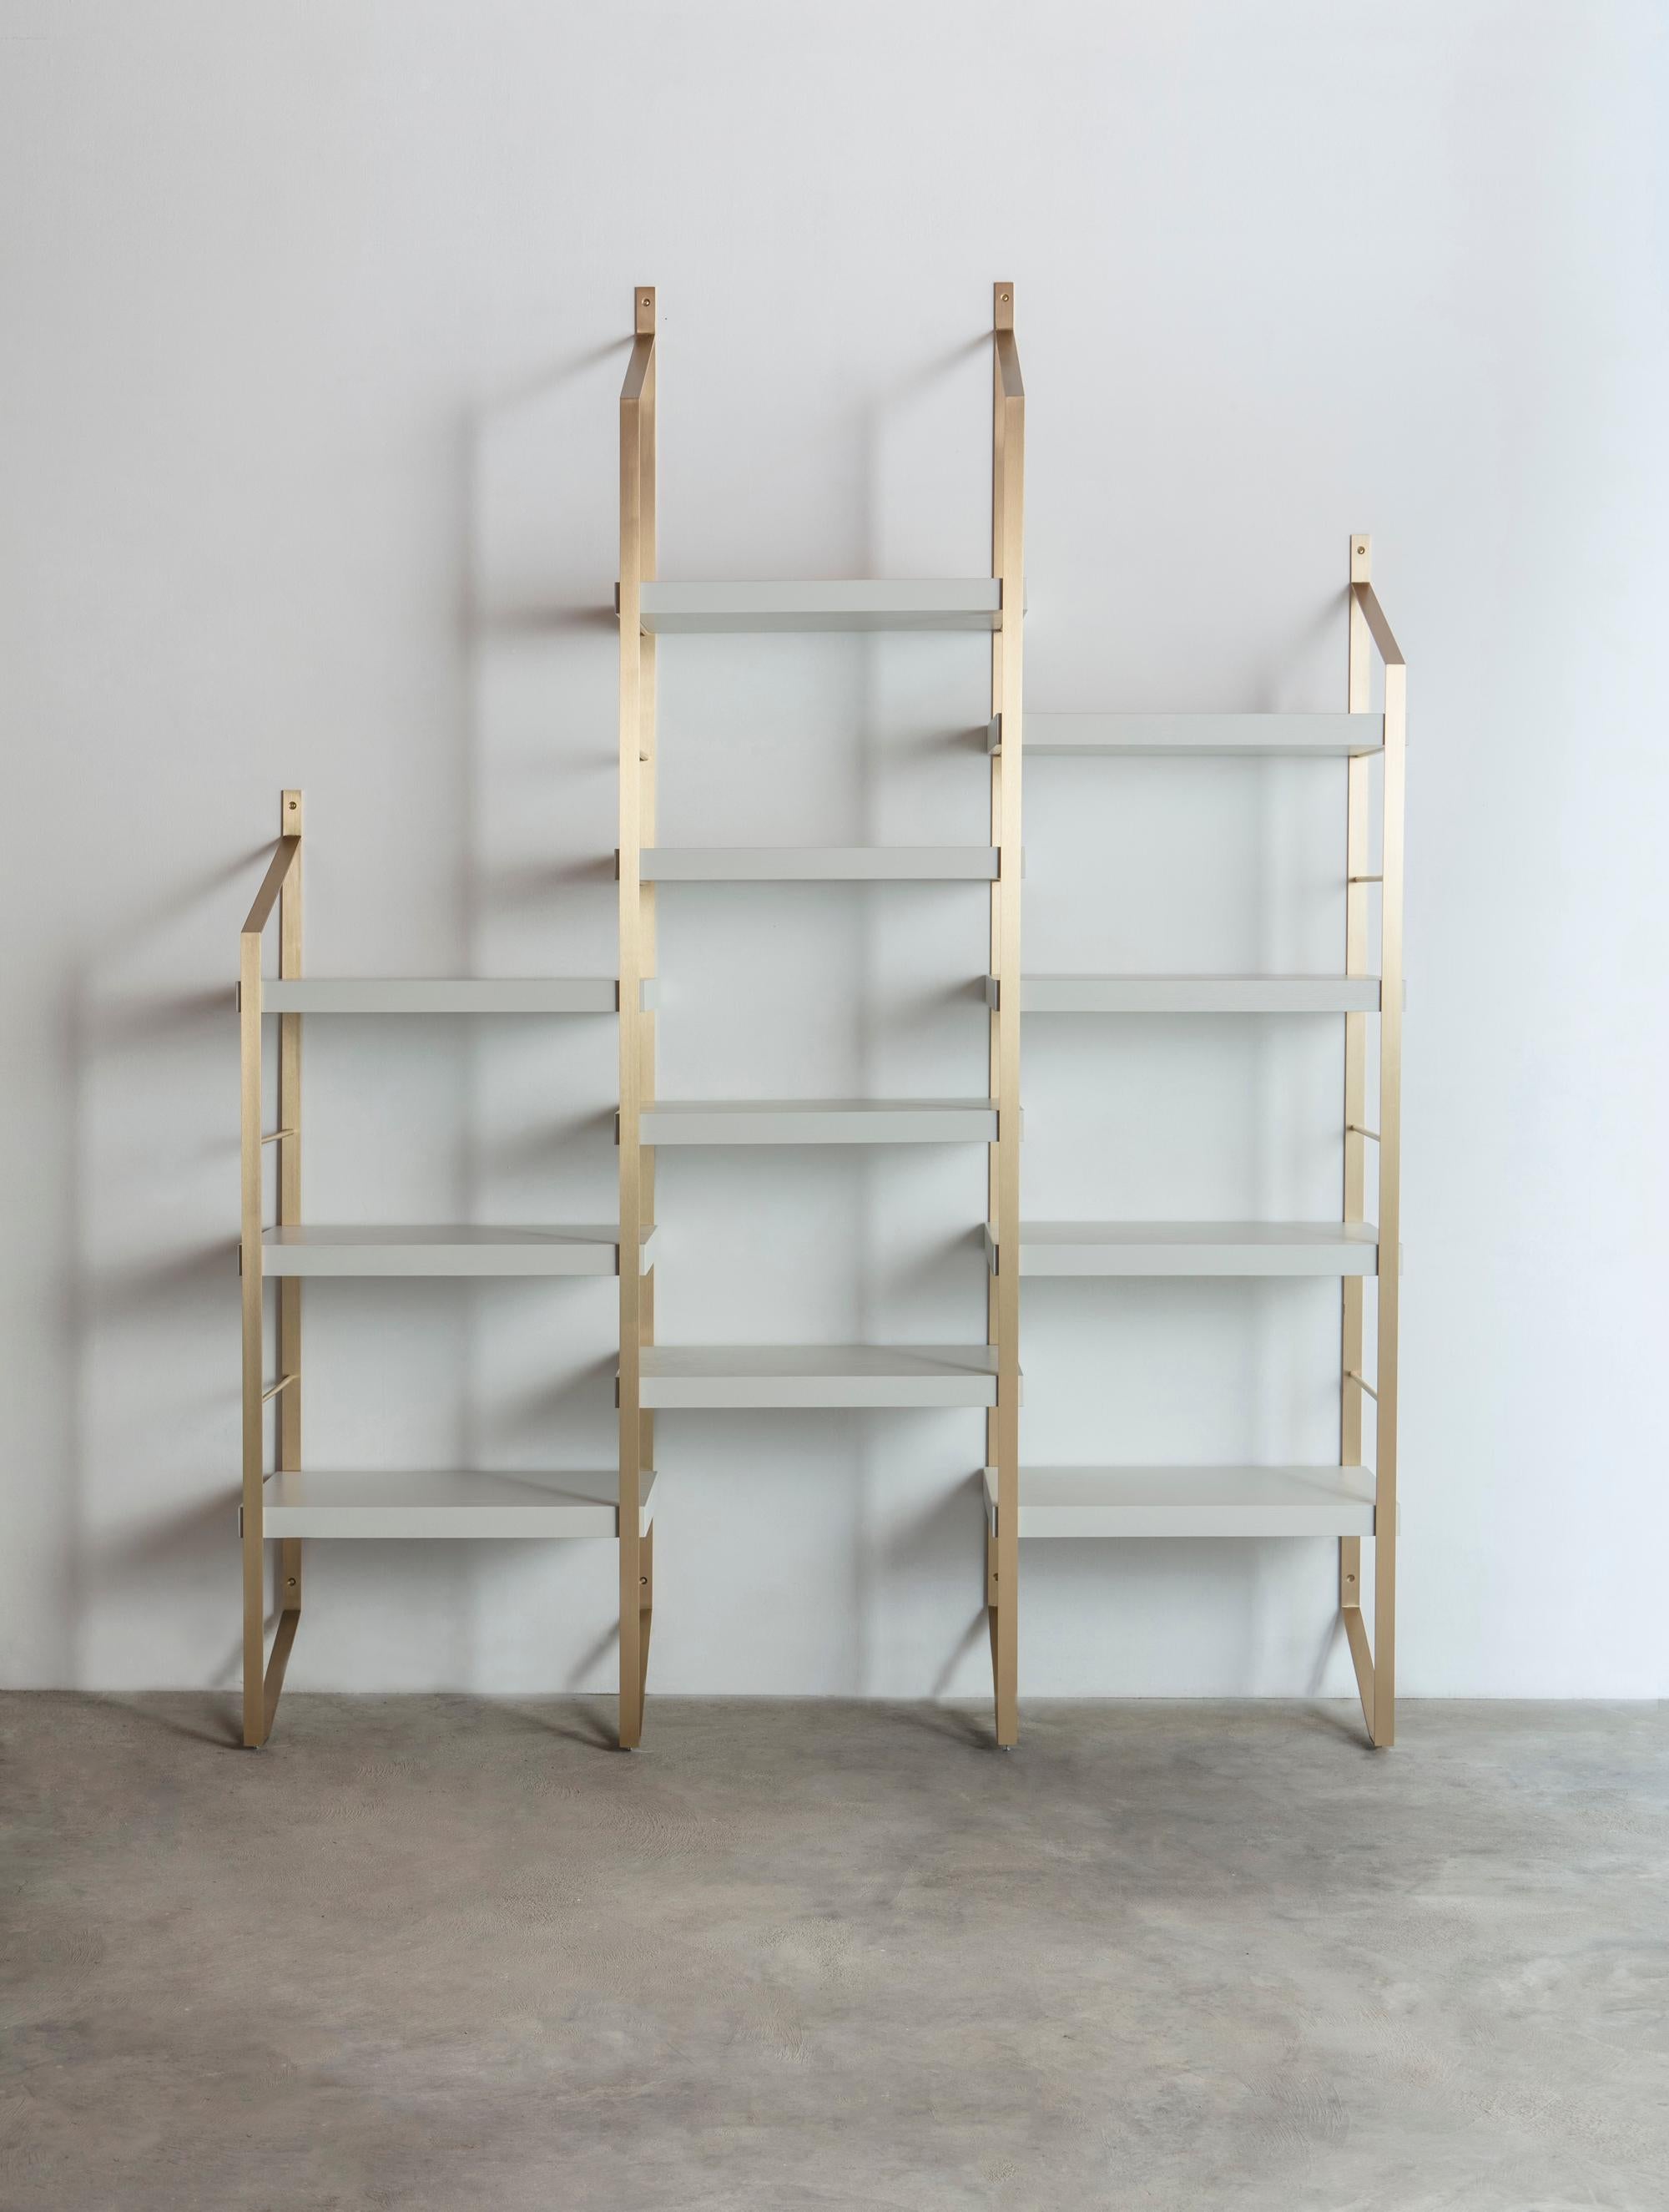 Step is a modular bookcase with brass structure, consisting of welded metal
plate and tubes. Three different heights of the columns allow to create a variety
of compositions. The shelves are assembled through simple joints. Brass uprights, like tape